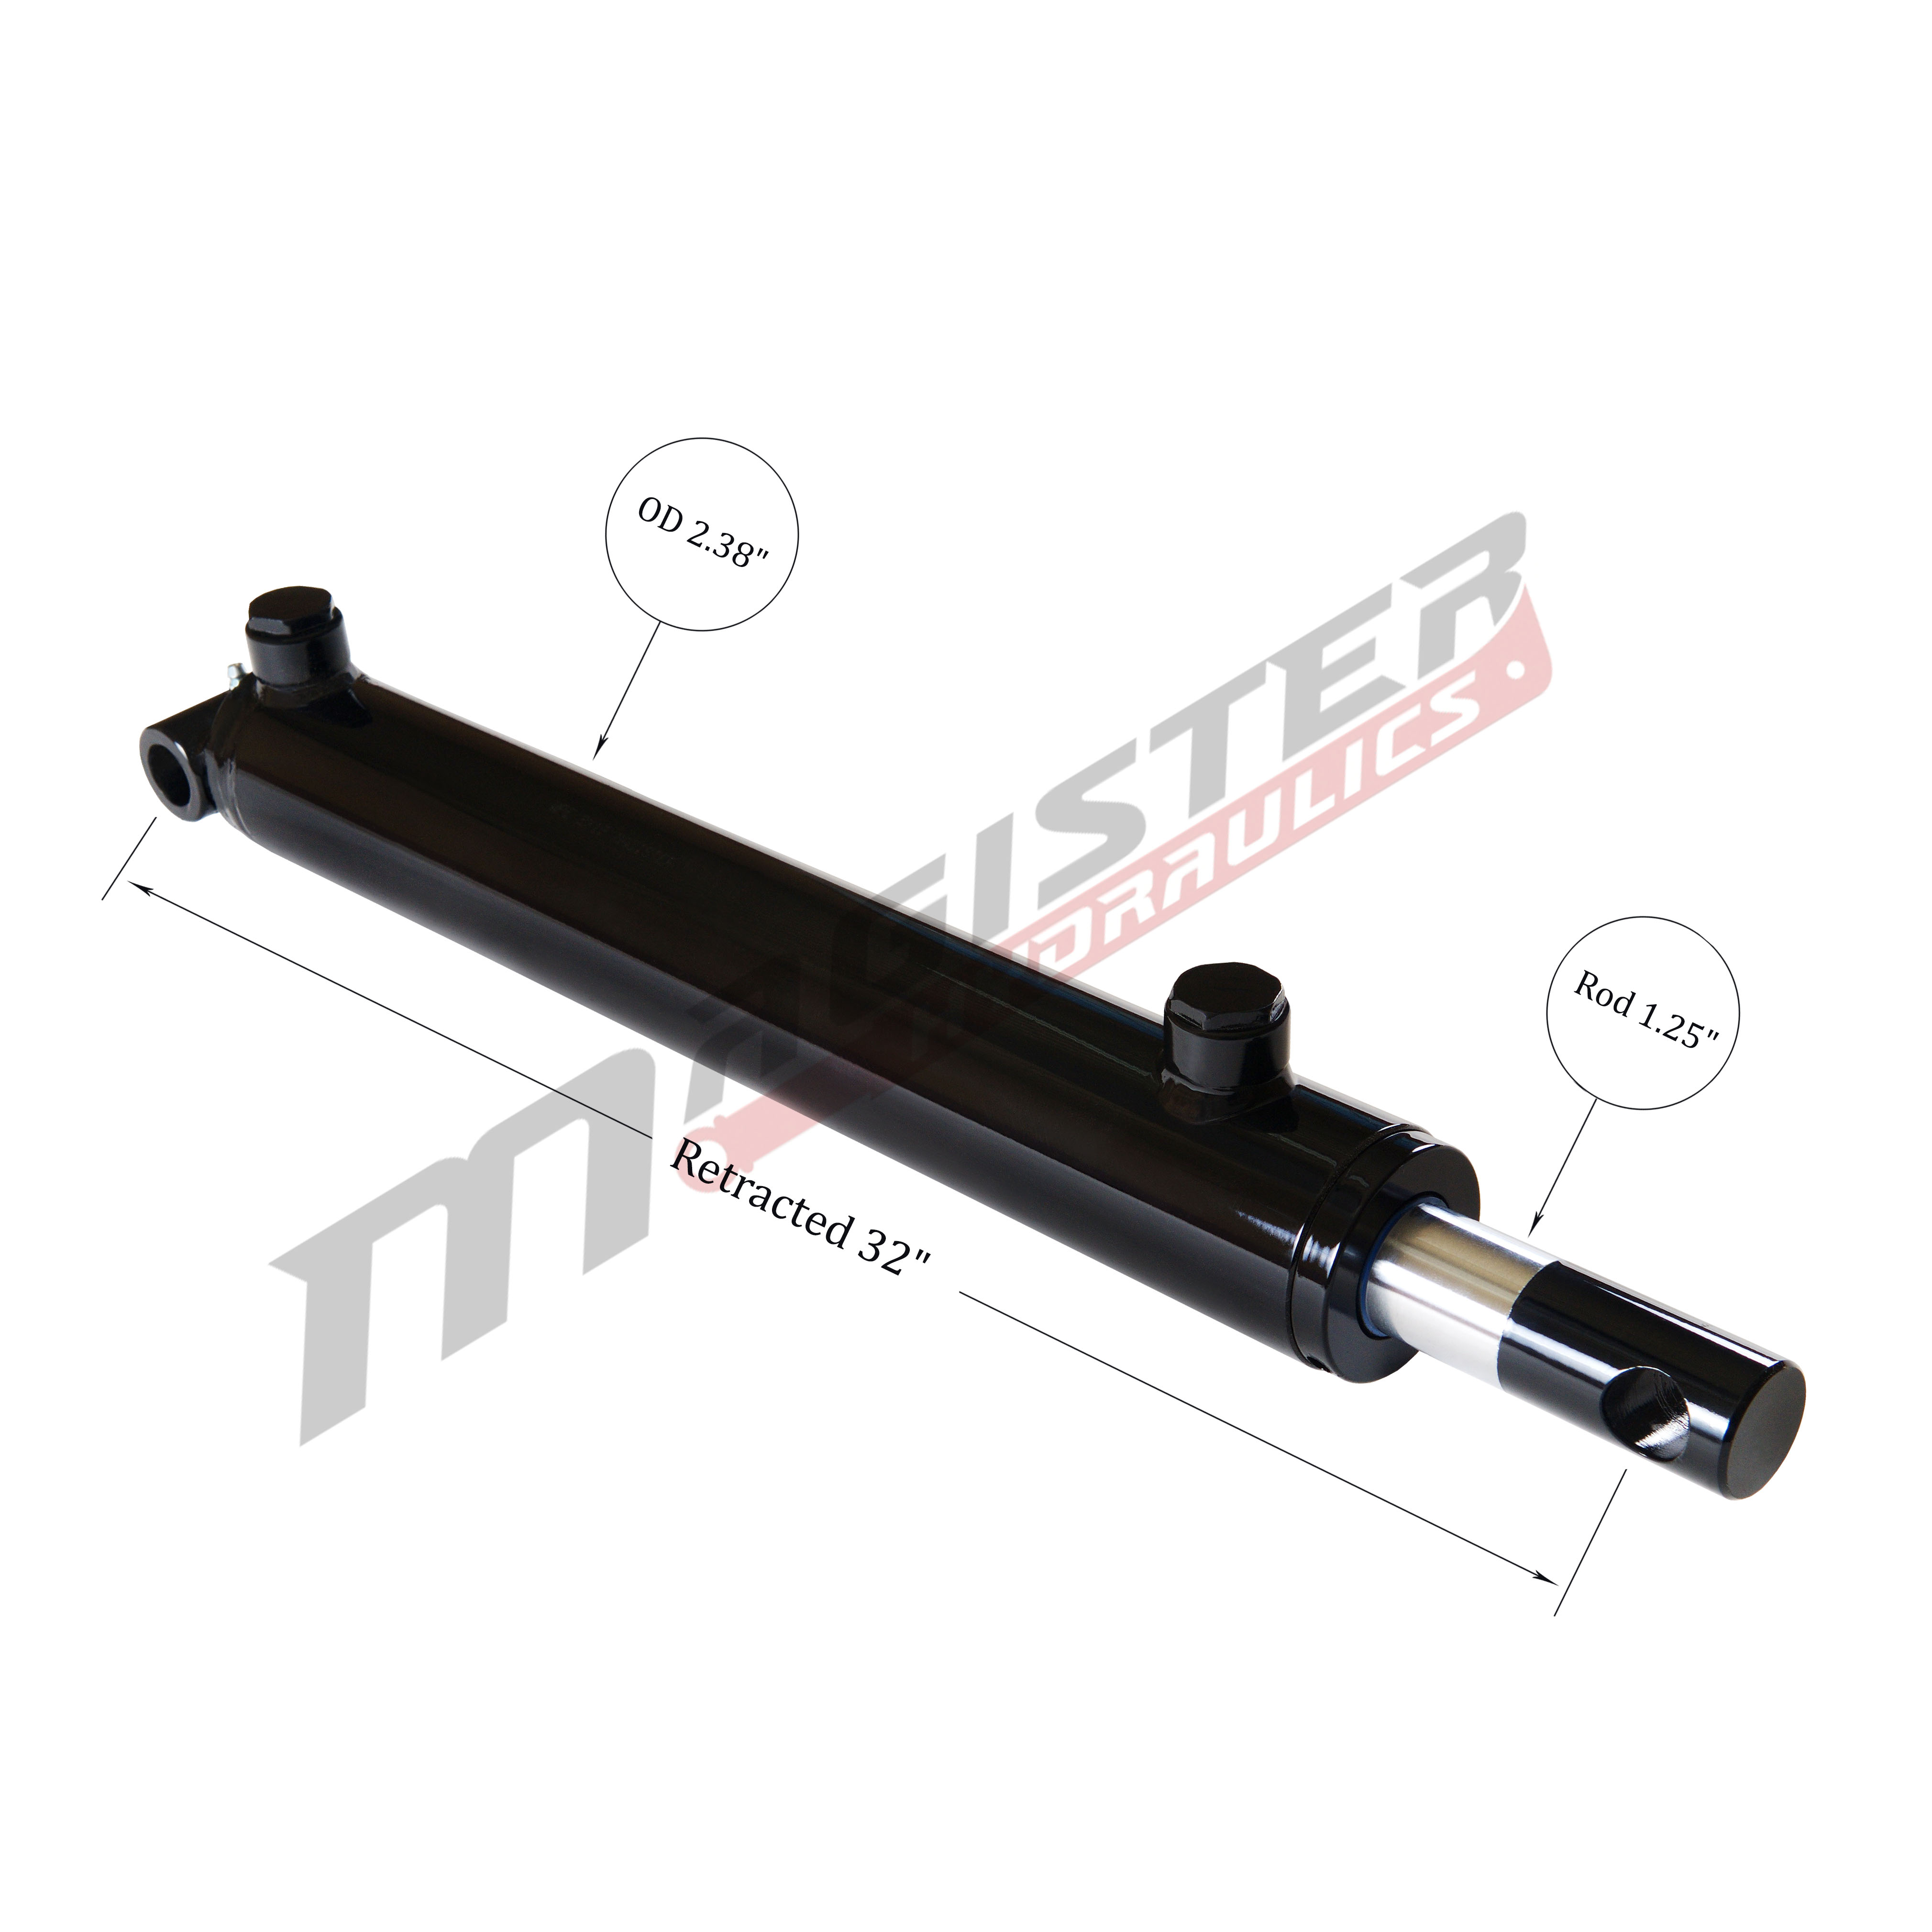 2 bore x 24 stroke hydraulic cylinder, welded pin eye double acting cylinder | Magister Hydraulics